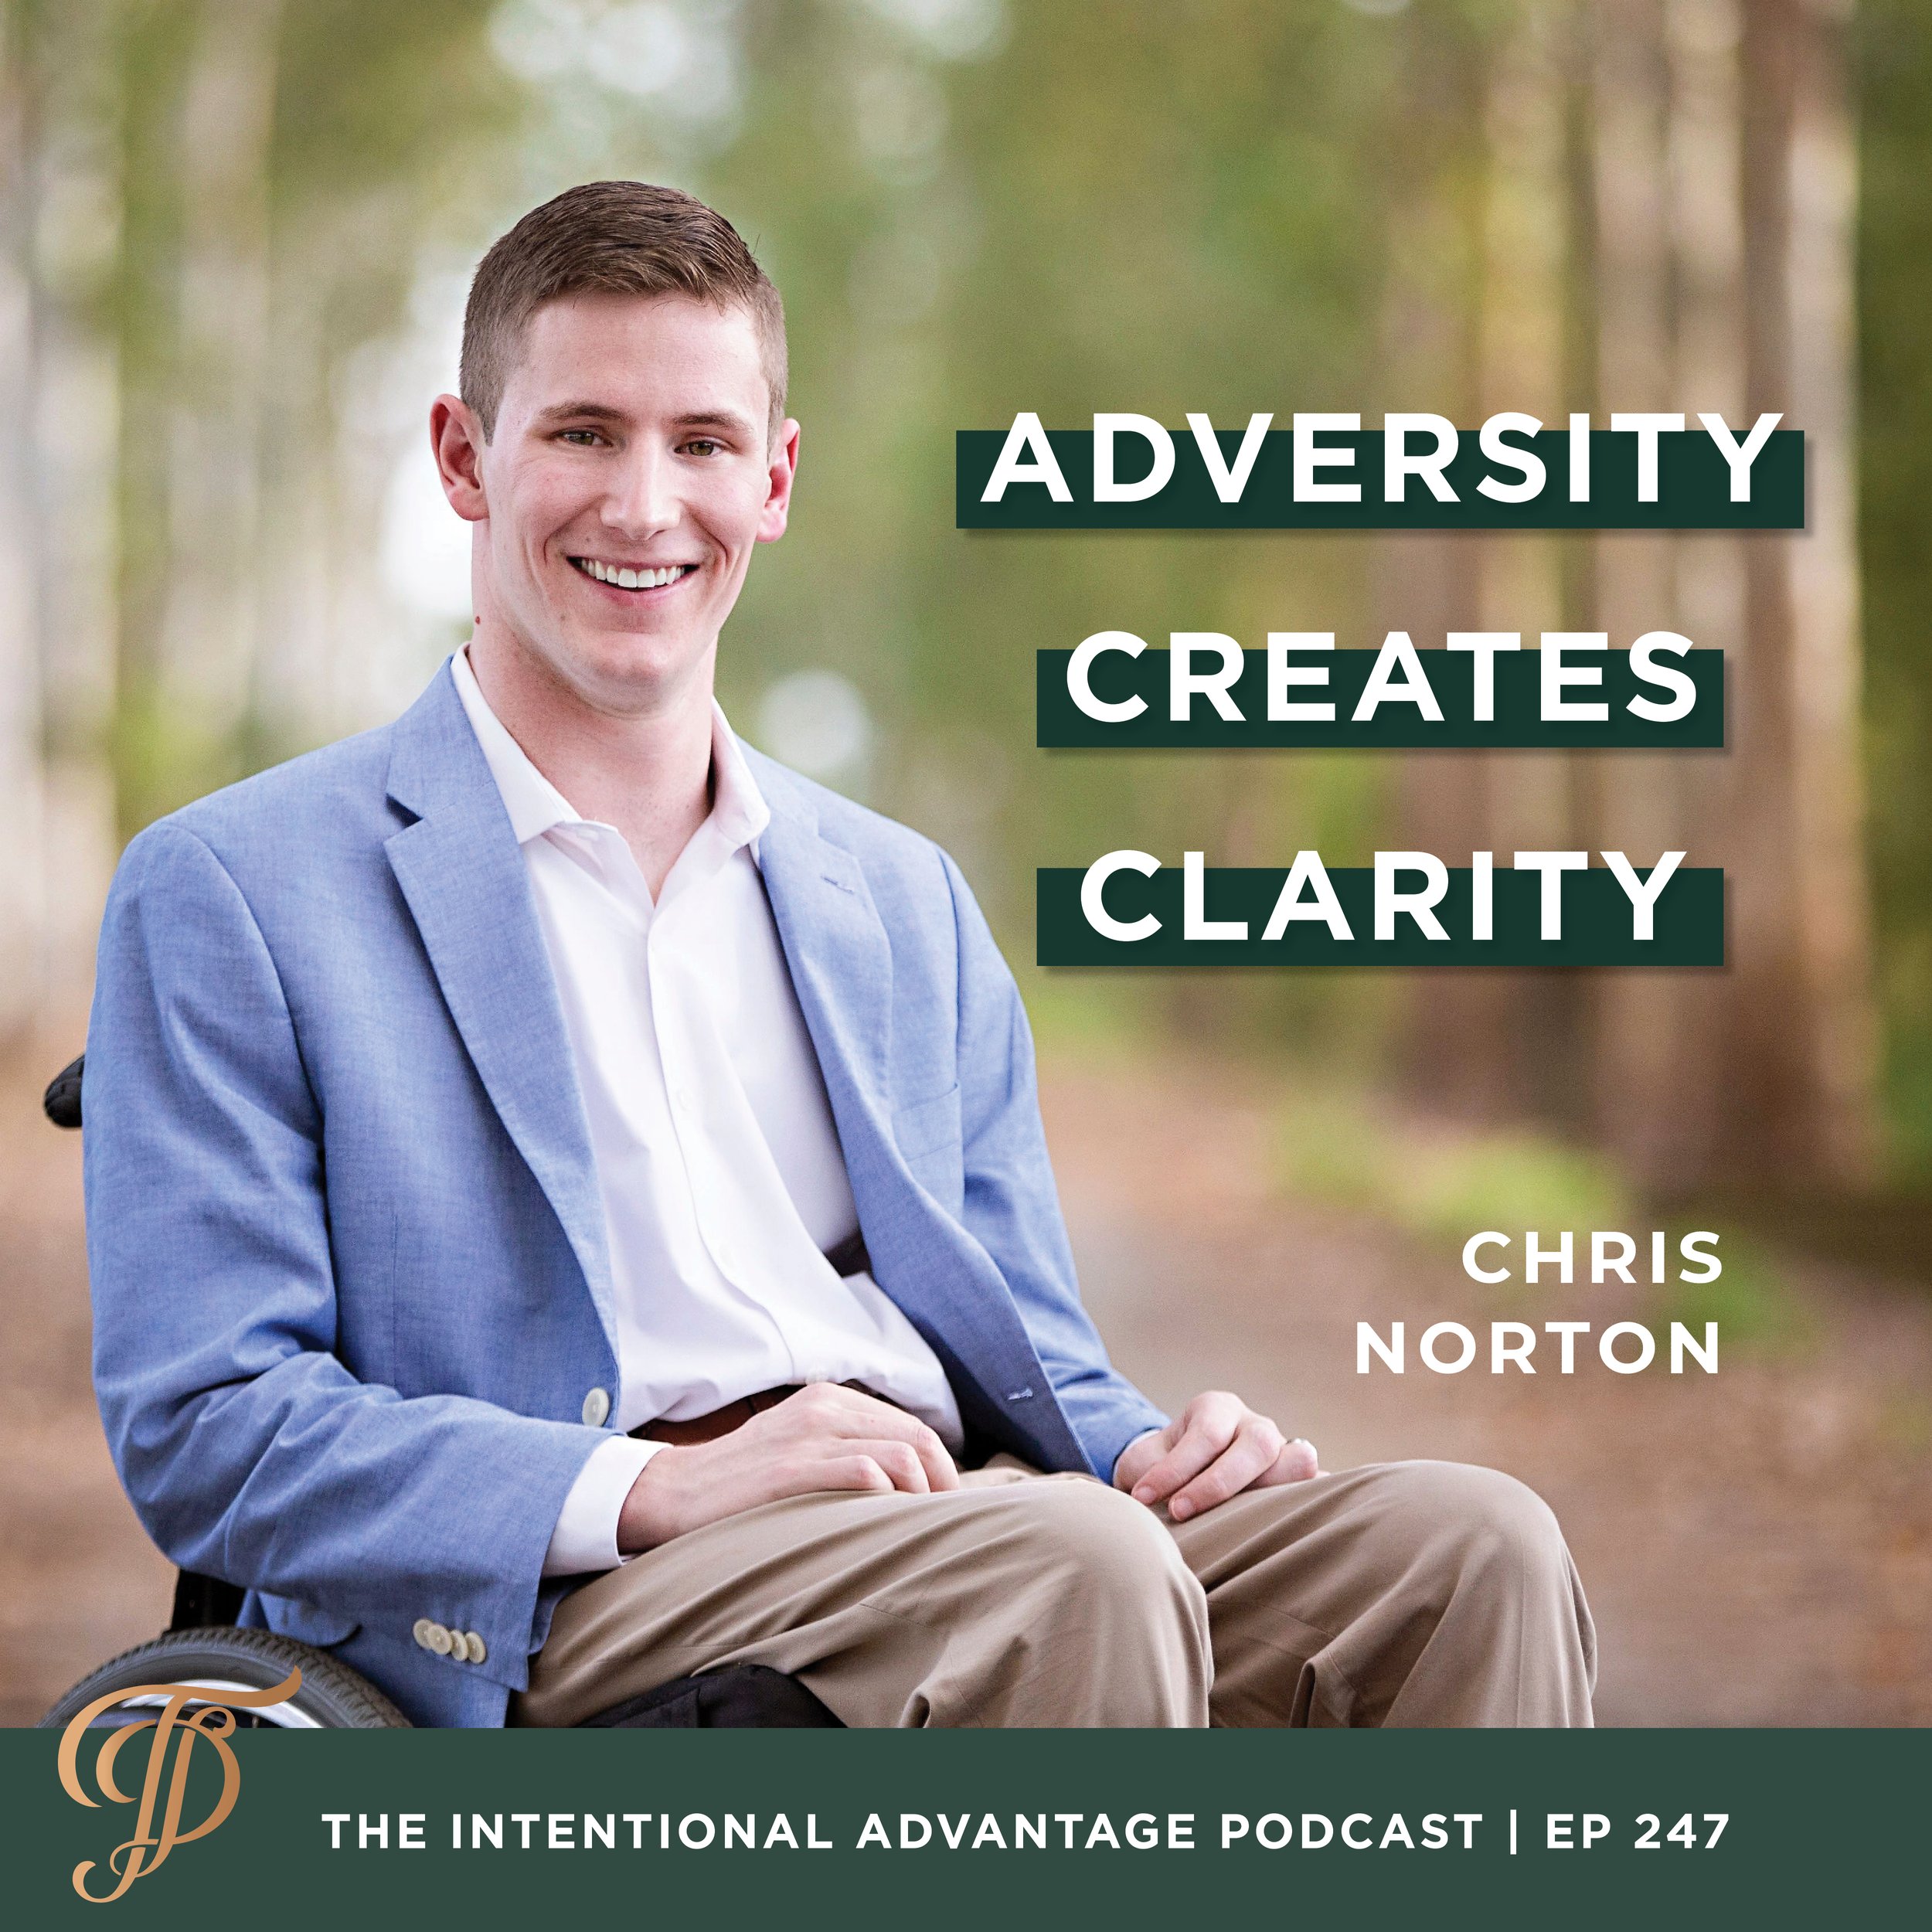 Chris Norton podcast interview on The Intentional Advantage